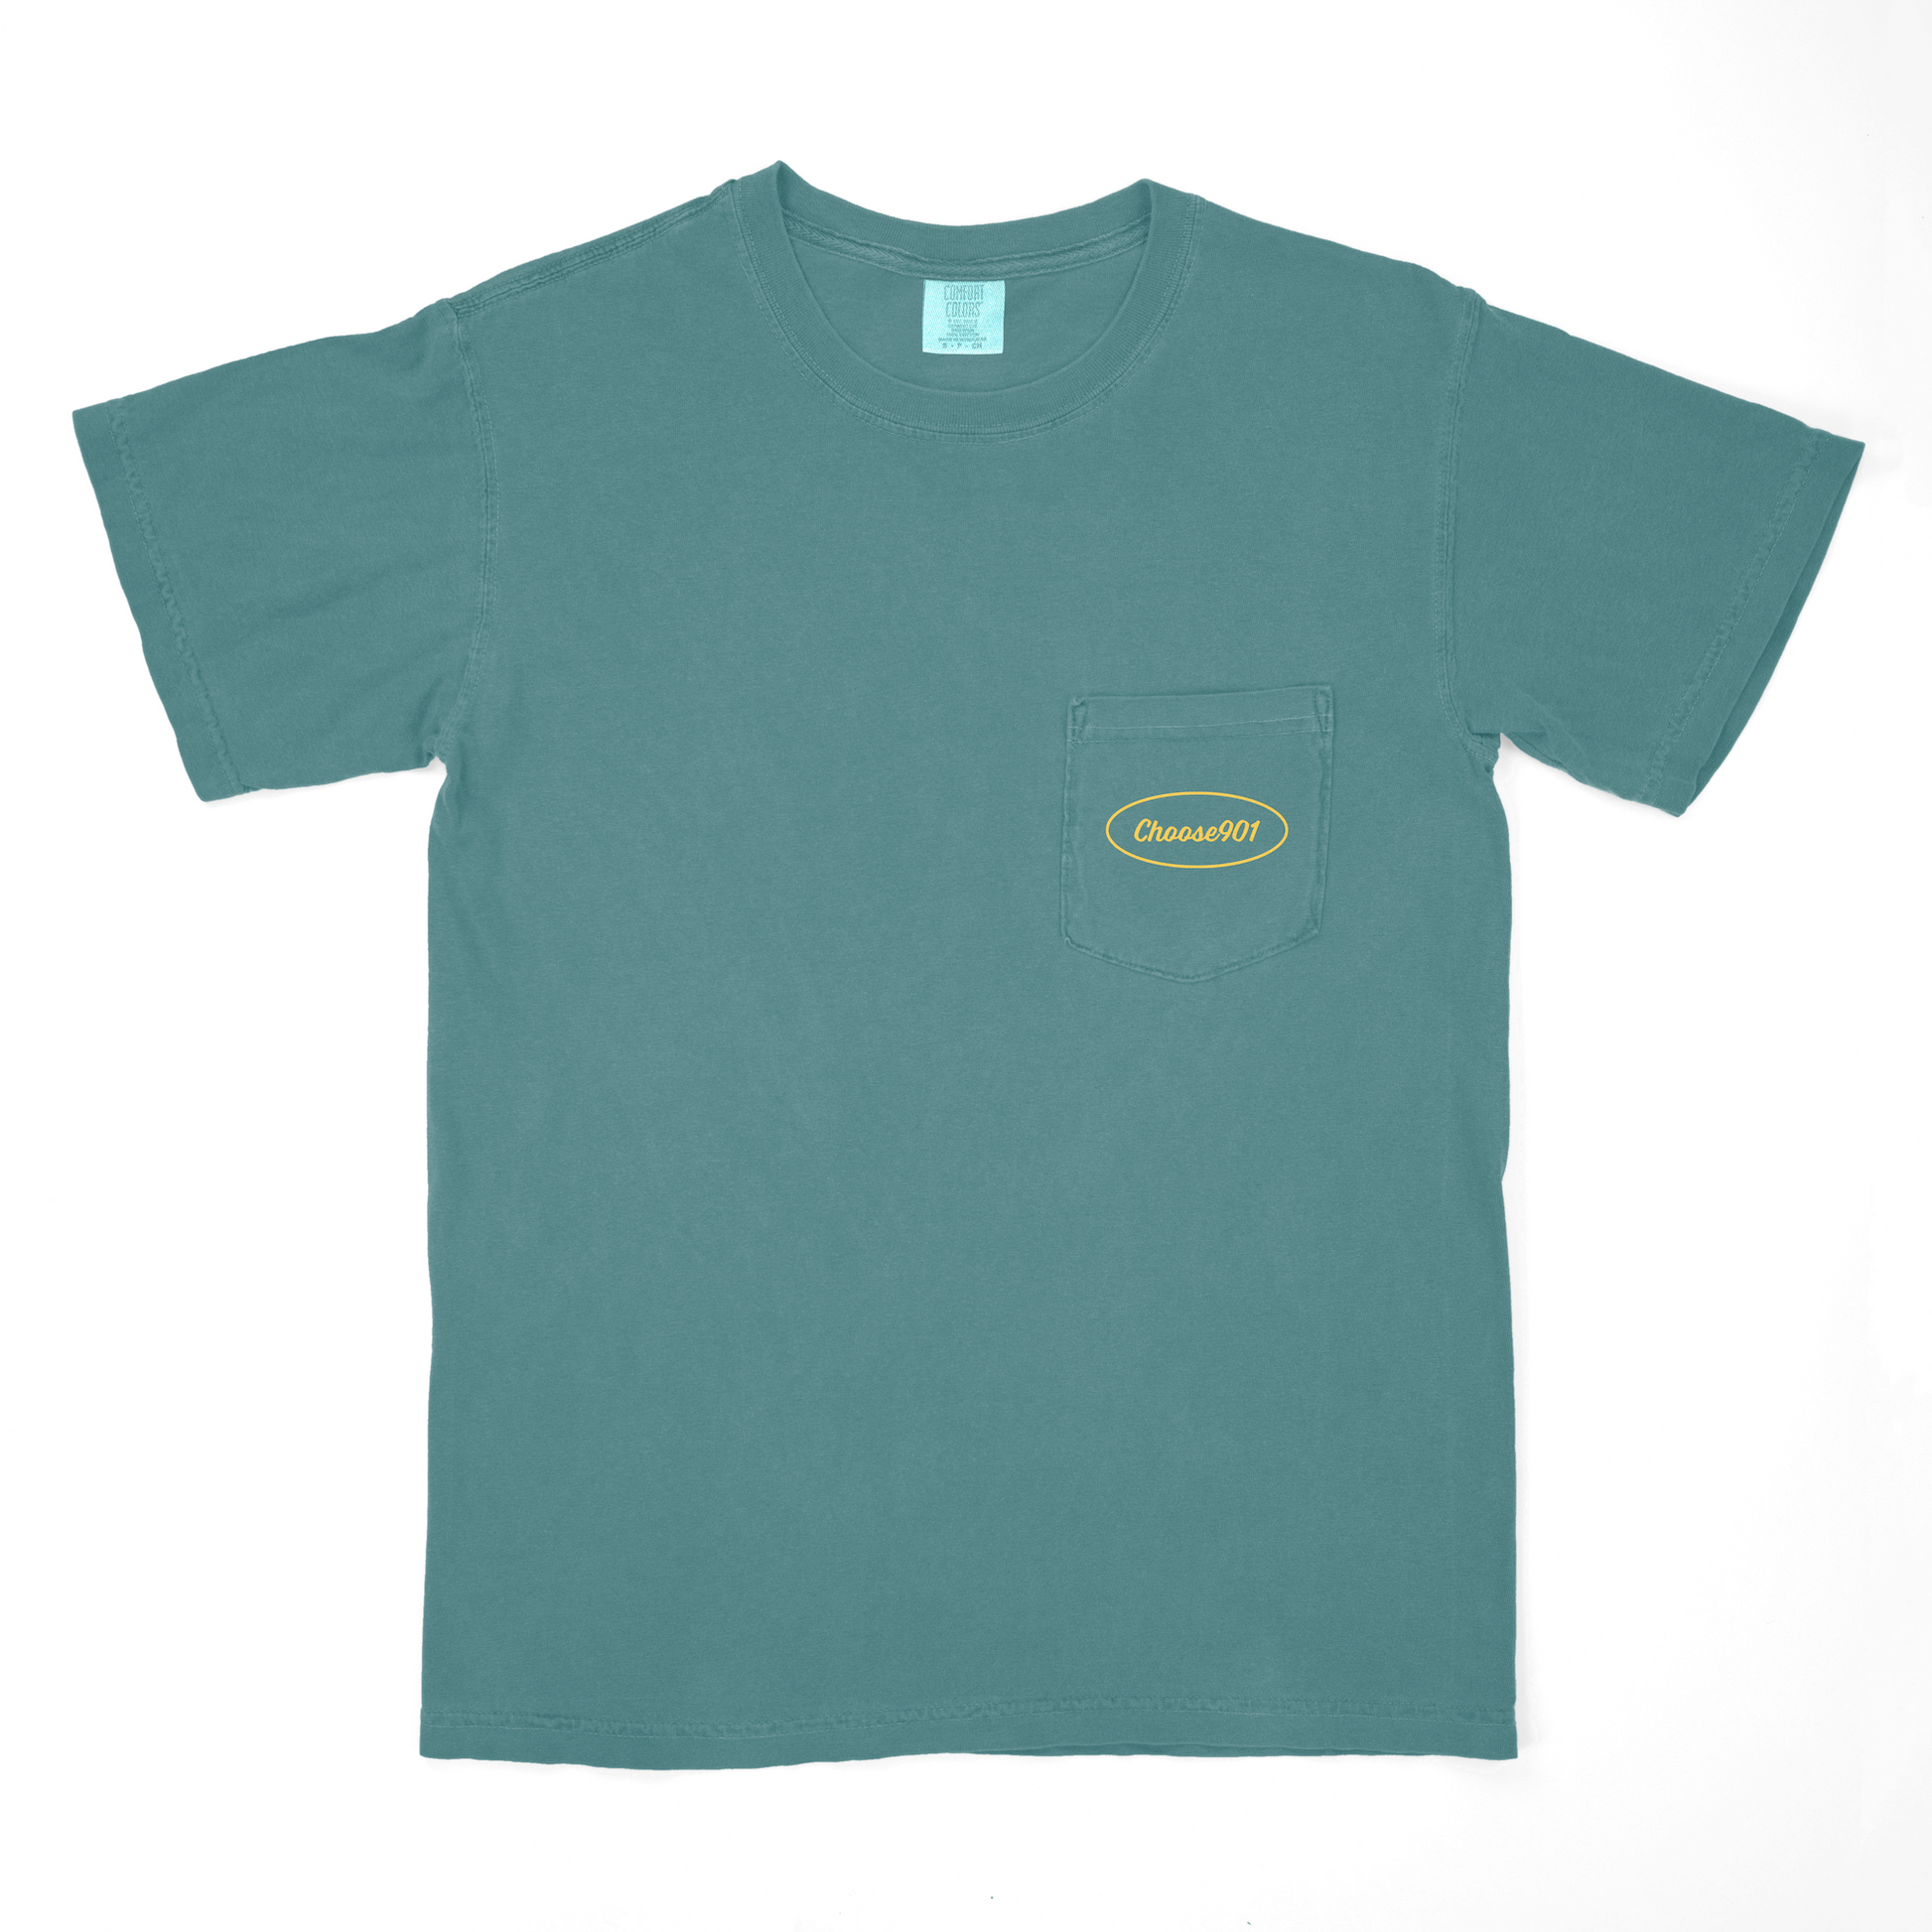 Teal Pothole Repair Shirt on Blue Spruce with a Memphis chest pocket and Choose901 Merch Shop brand label.